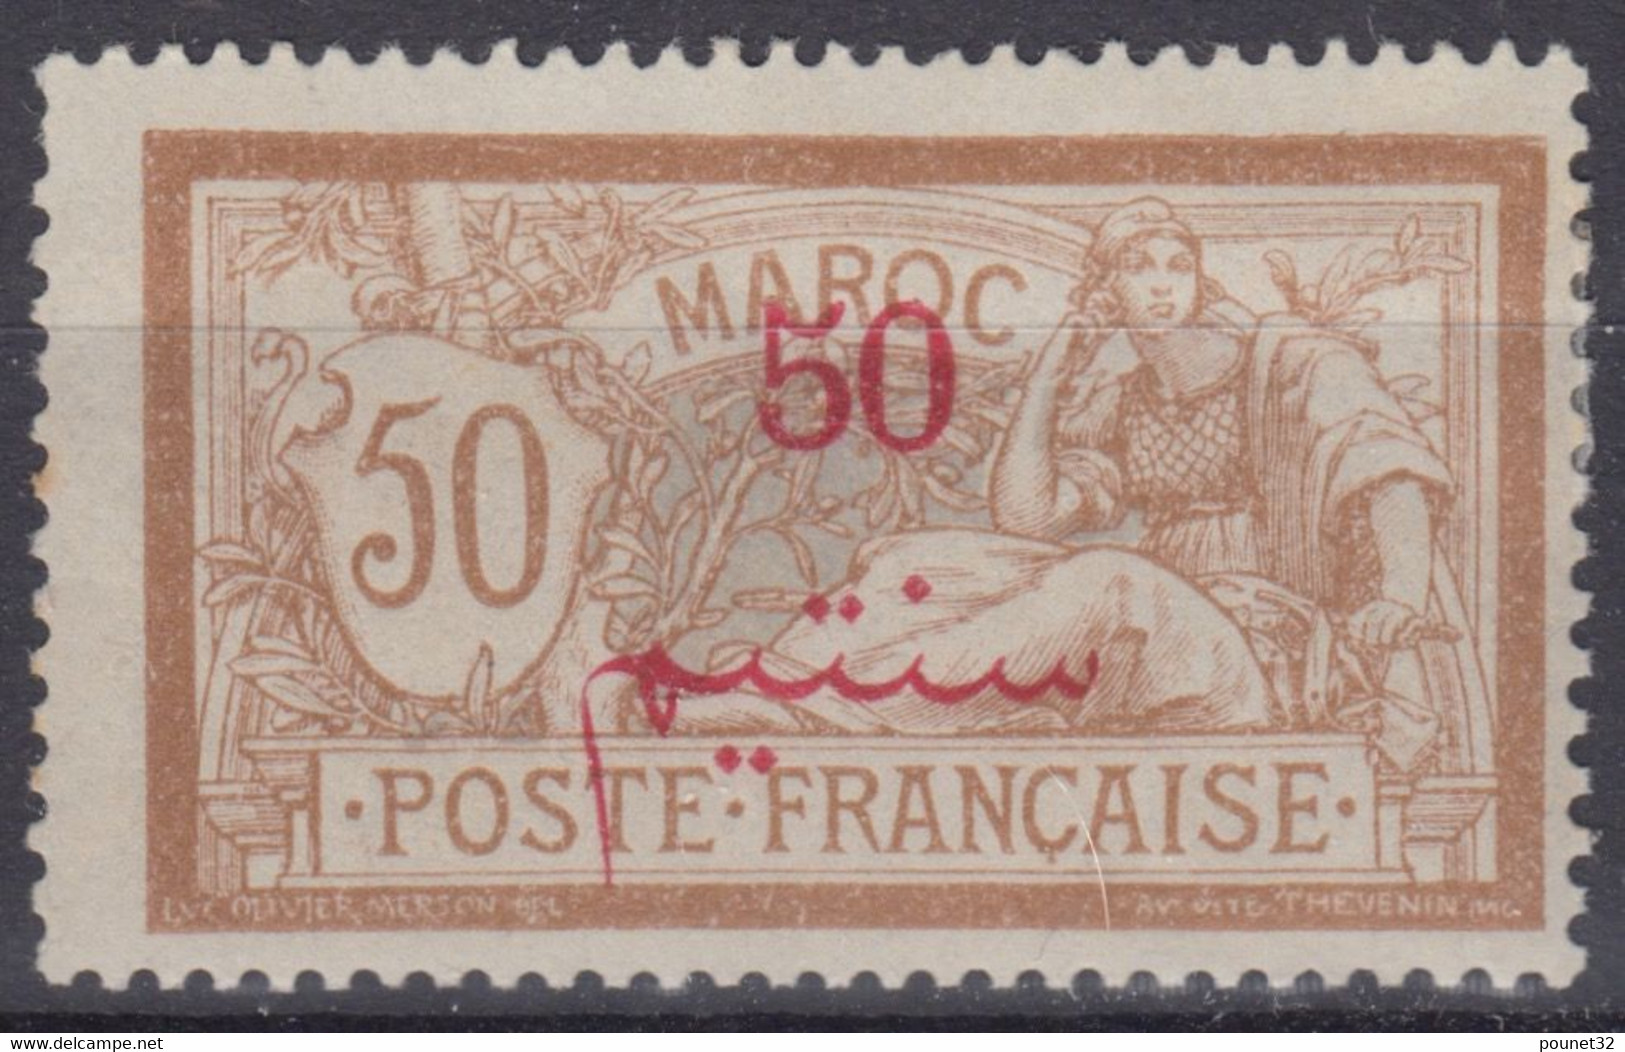 MAROC : 50c MERSON SURCHARGE N° 35 NEUF * GOMME AVEC CHARNIERE - Unused Stamps